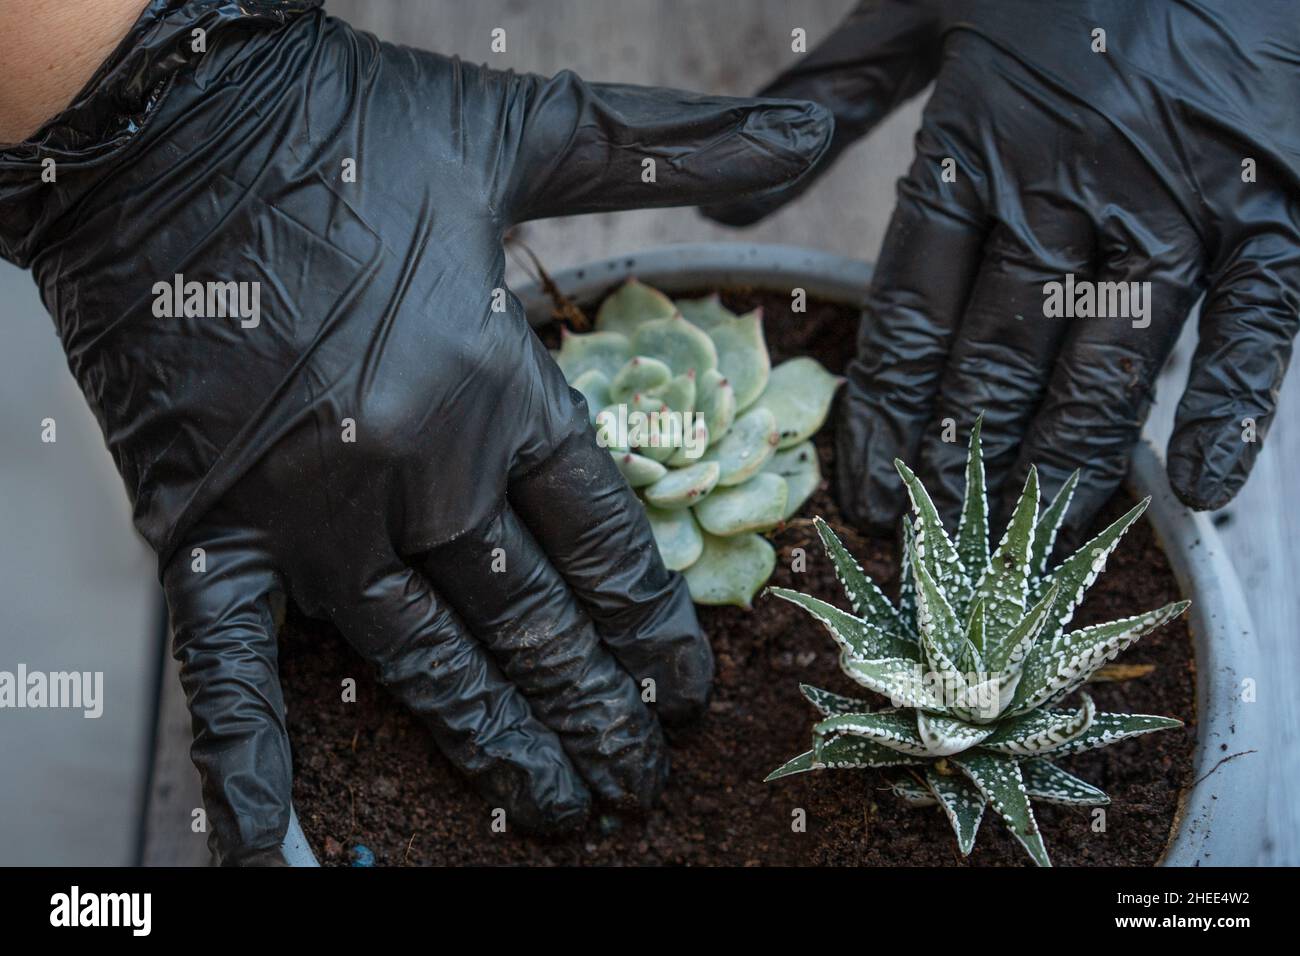 Home gardening. Woman caring for the plant. Female hands in gloves planting succulents in a pot, close-up. Indoor care, biophilia design and love for house plants. Stock Photo